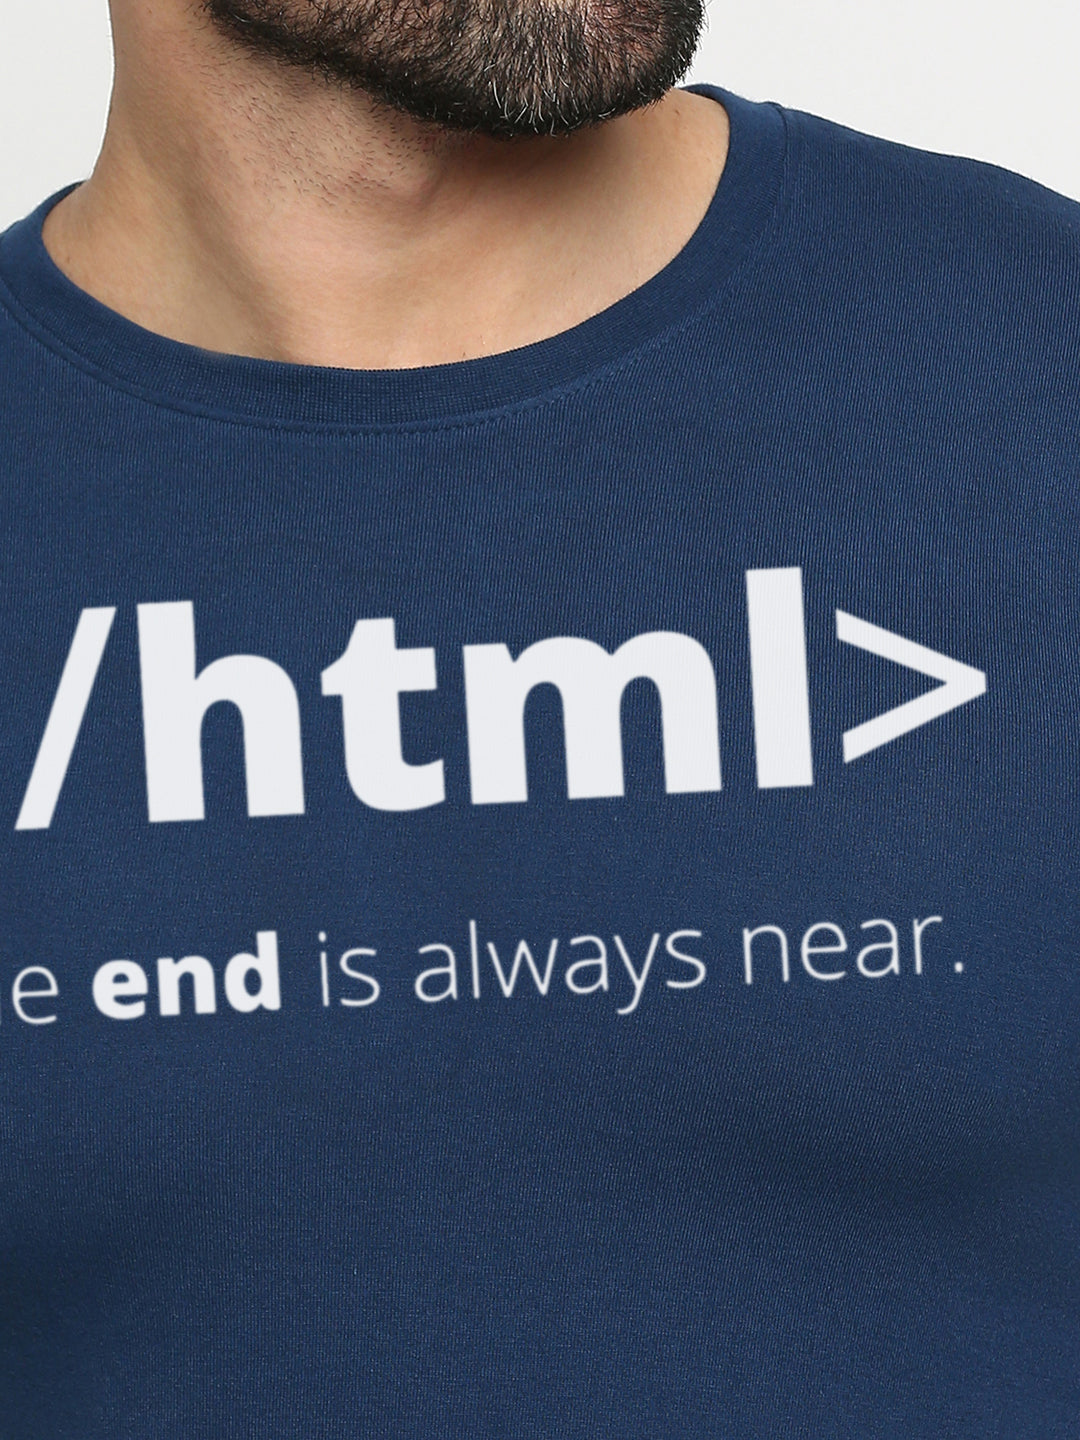 HTML The End is Always Near T-Shirt